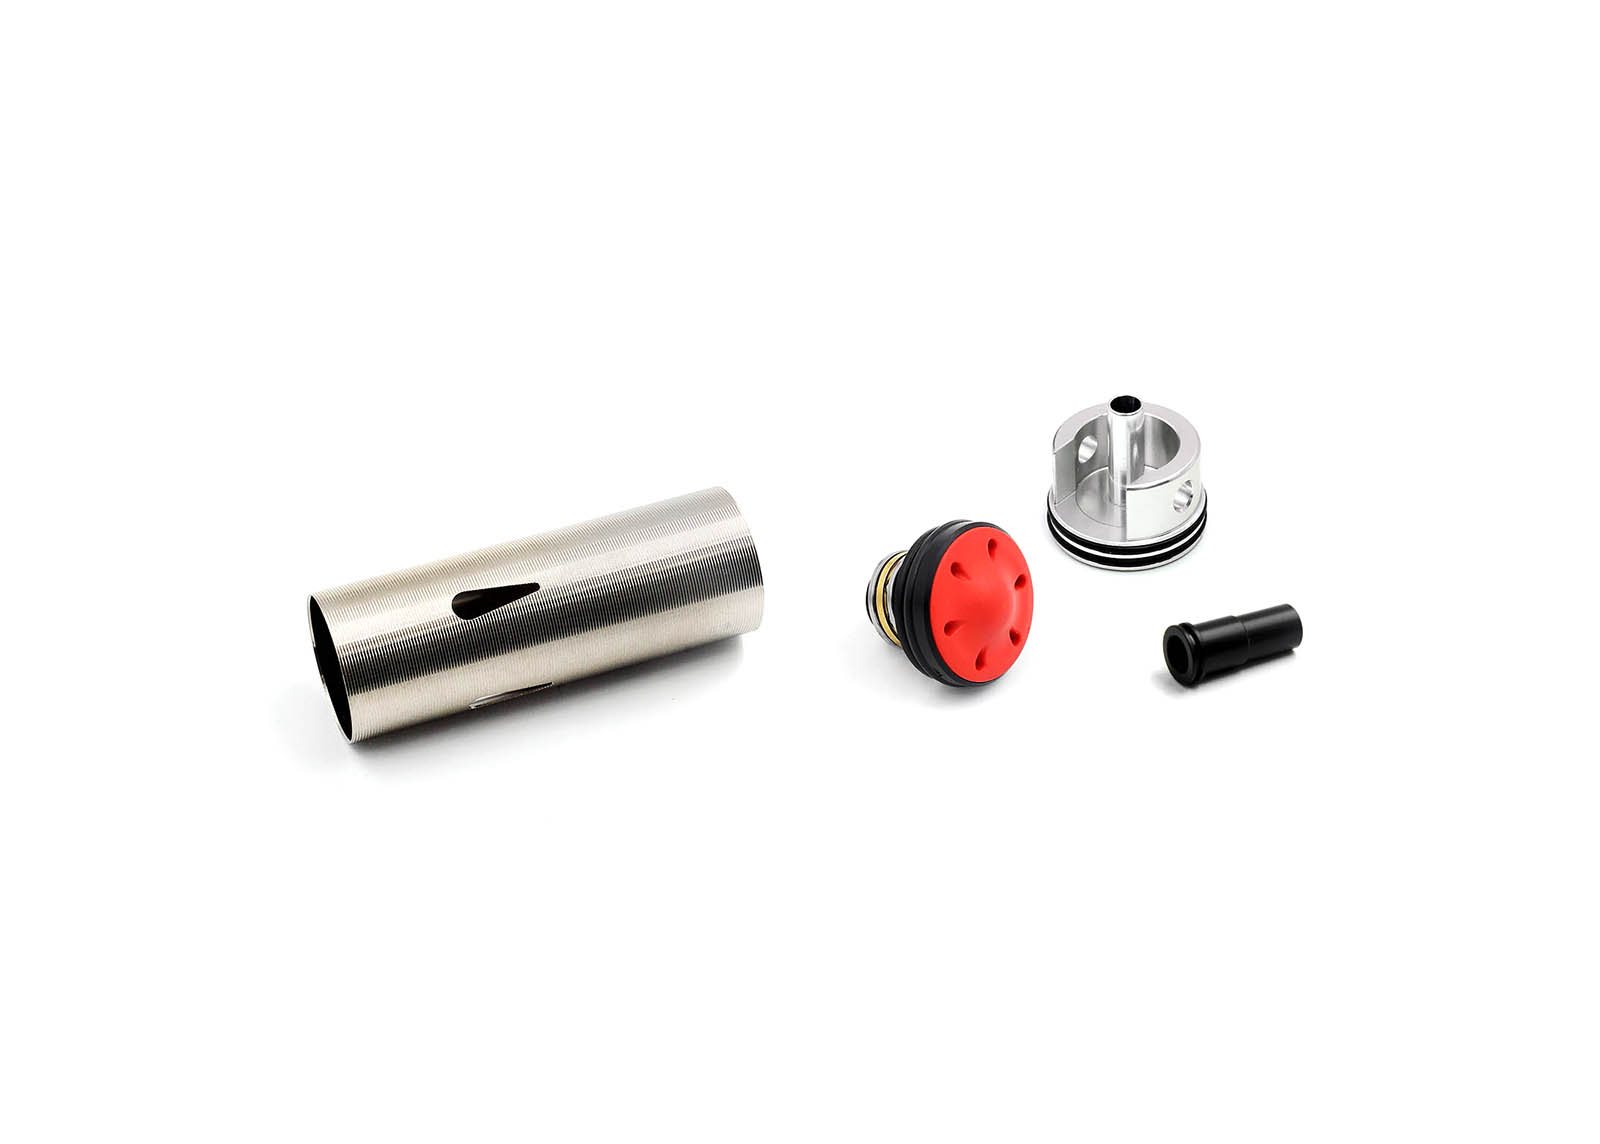 Bore-Up Cylinder Set for MP5-A4/A5/SD5/SD6 (CA Type) - Modify Airsoft parts